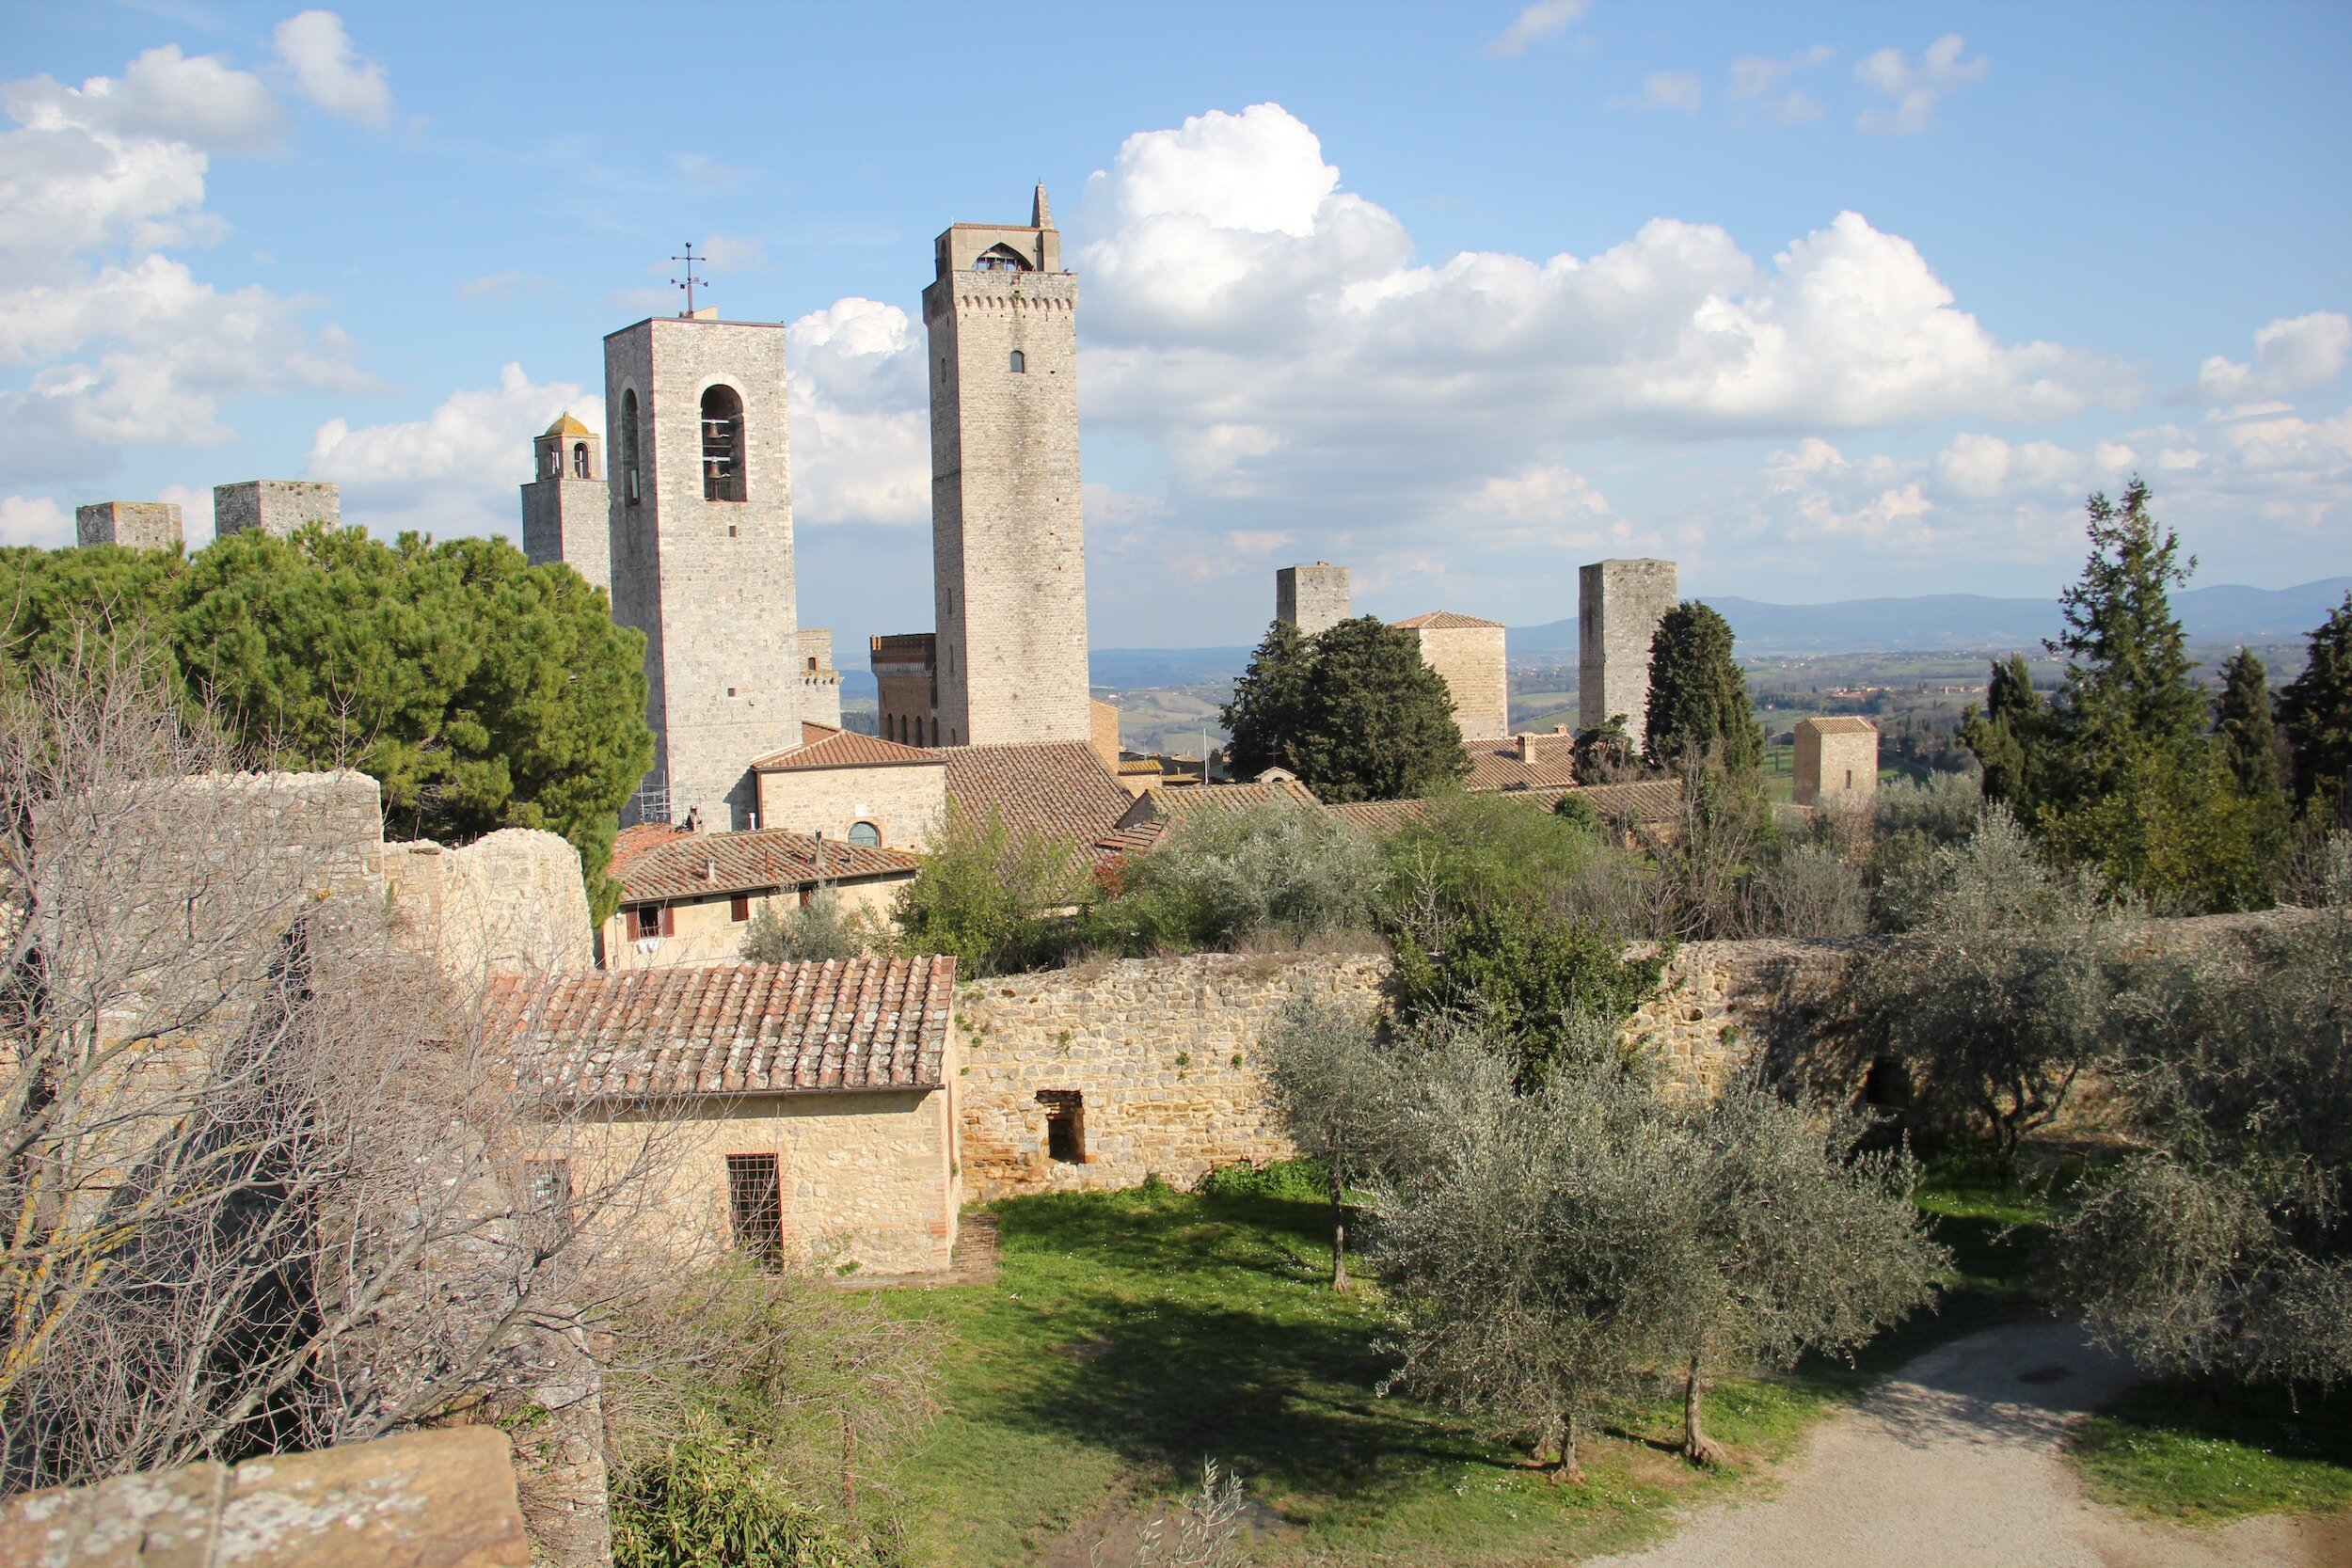 The town of San Gimignano in Italy, with a few of its famous stone towers in view